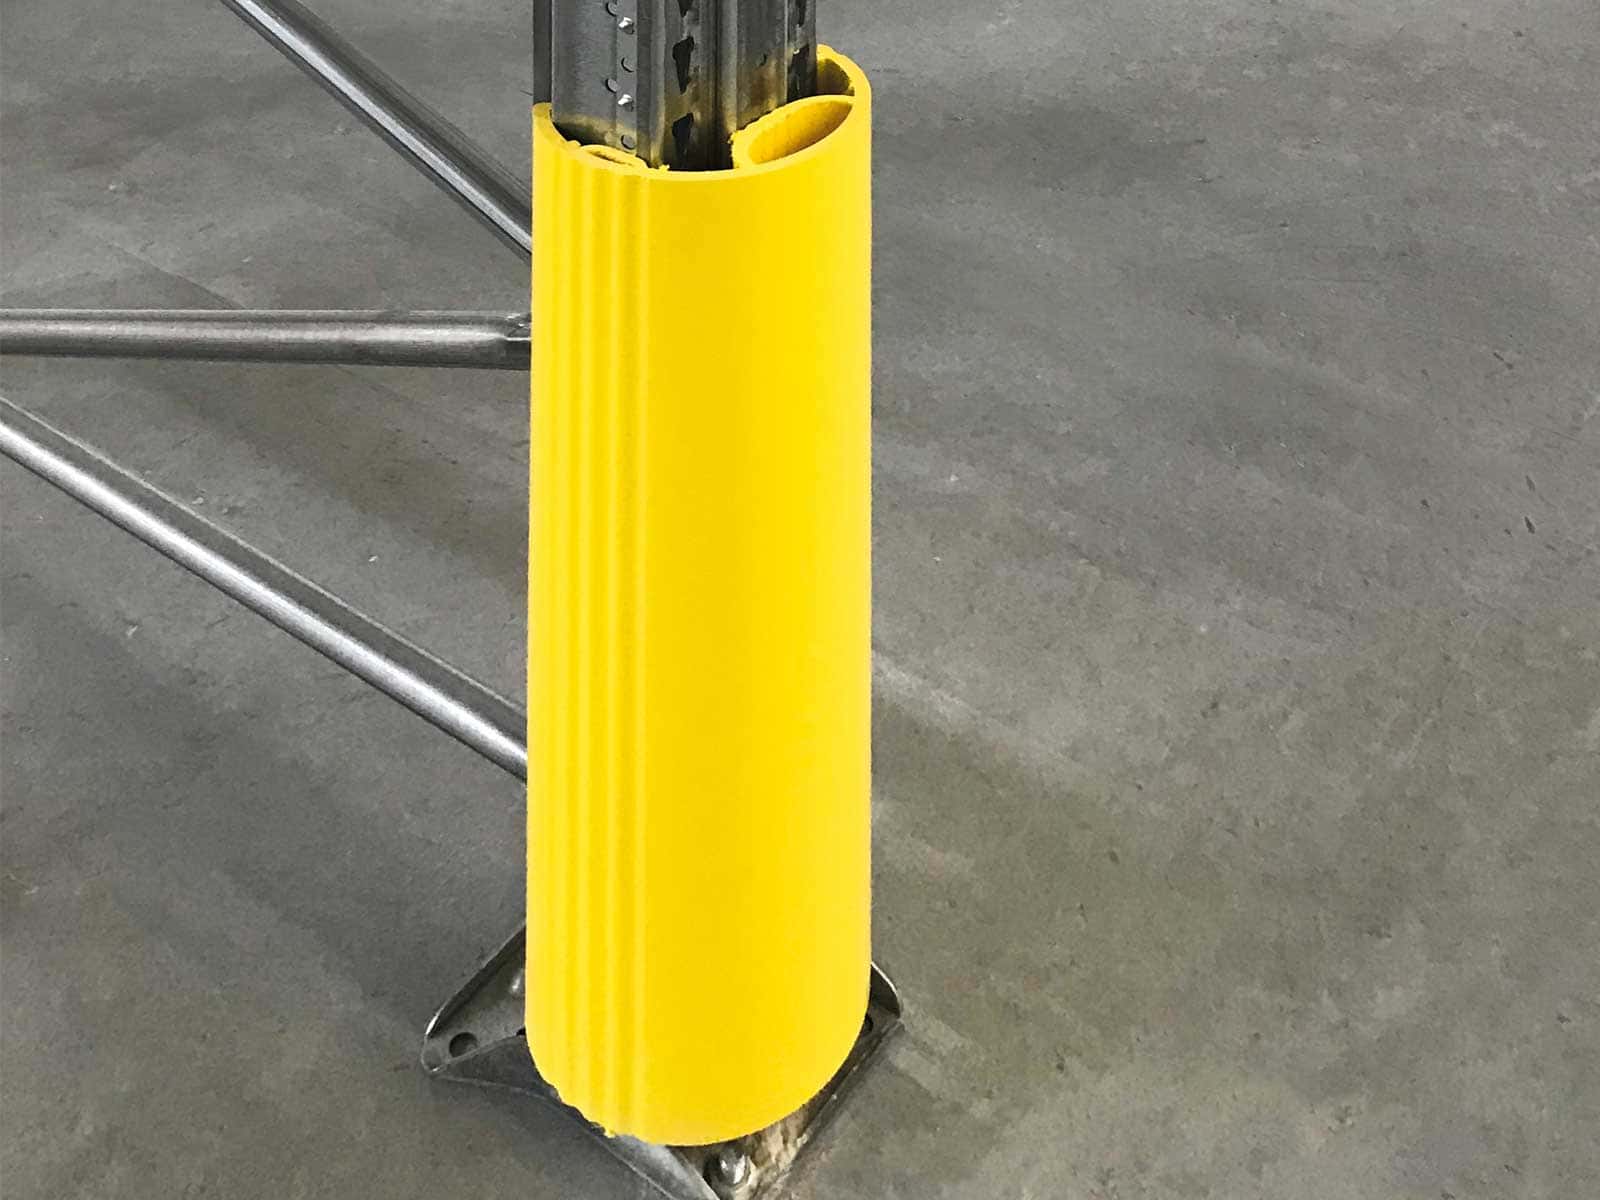 racking protection | rack bumper guards|protection barrier|barrier safety